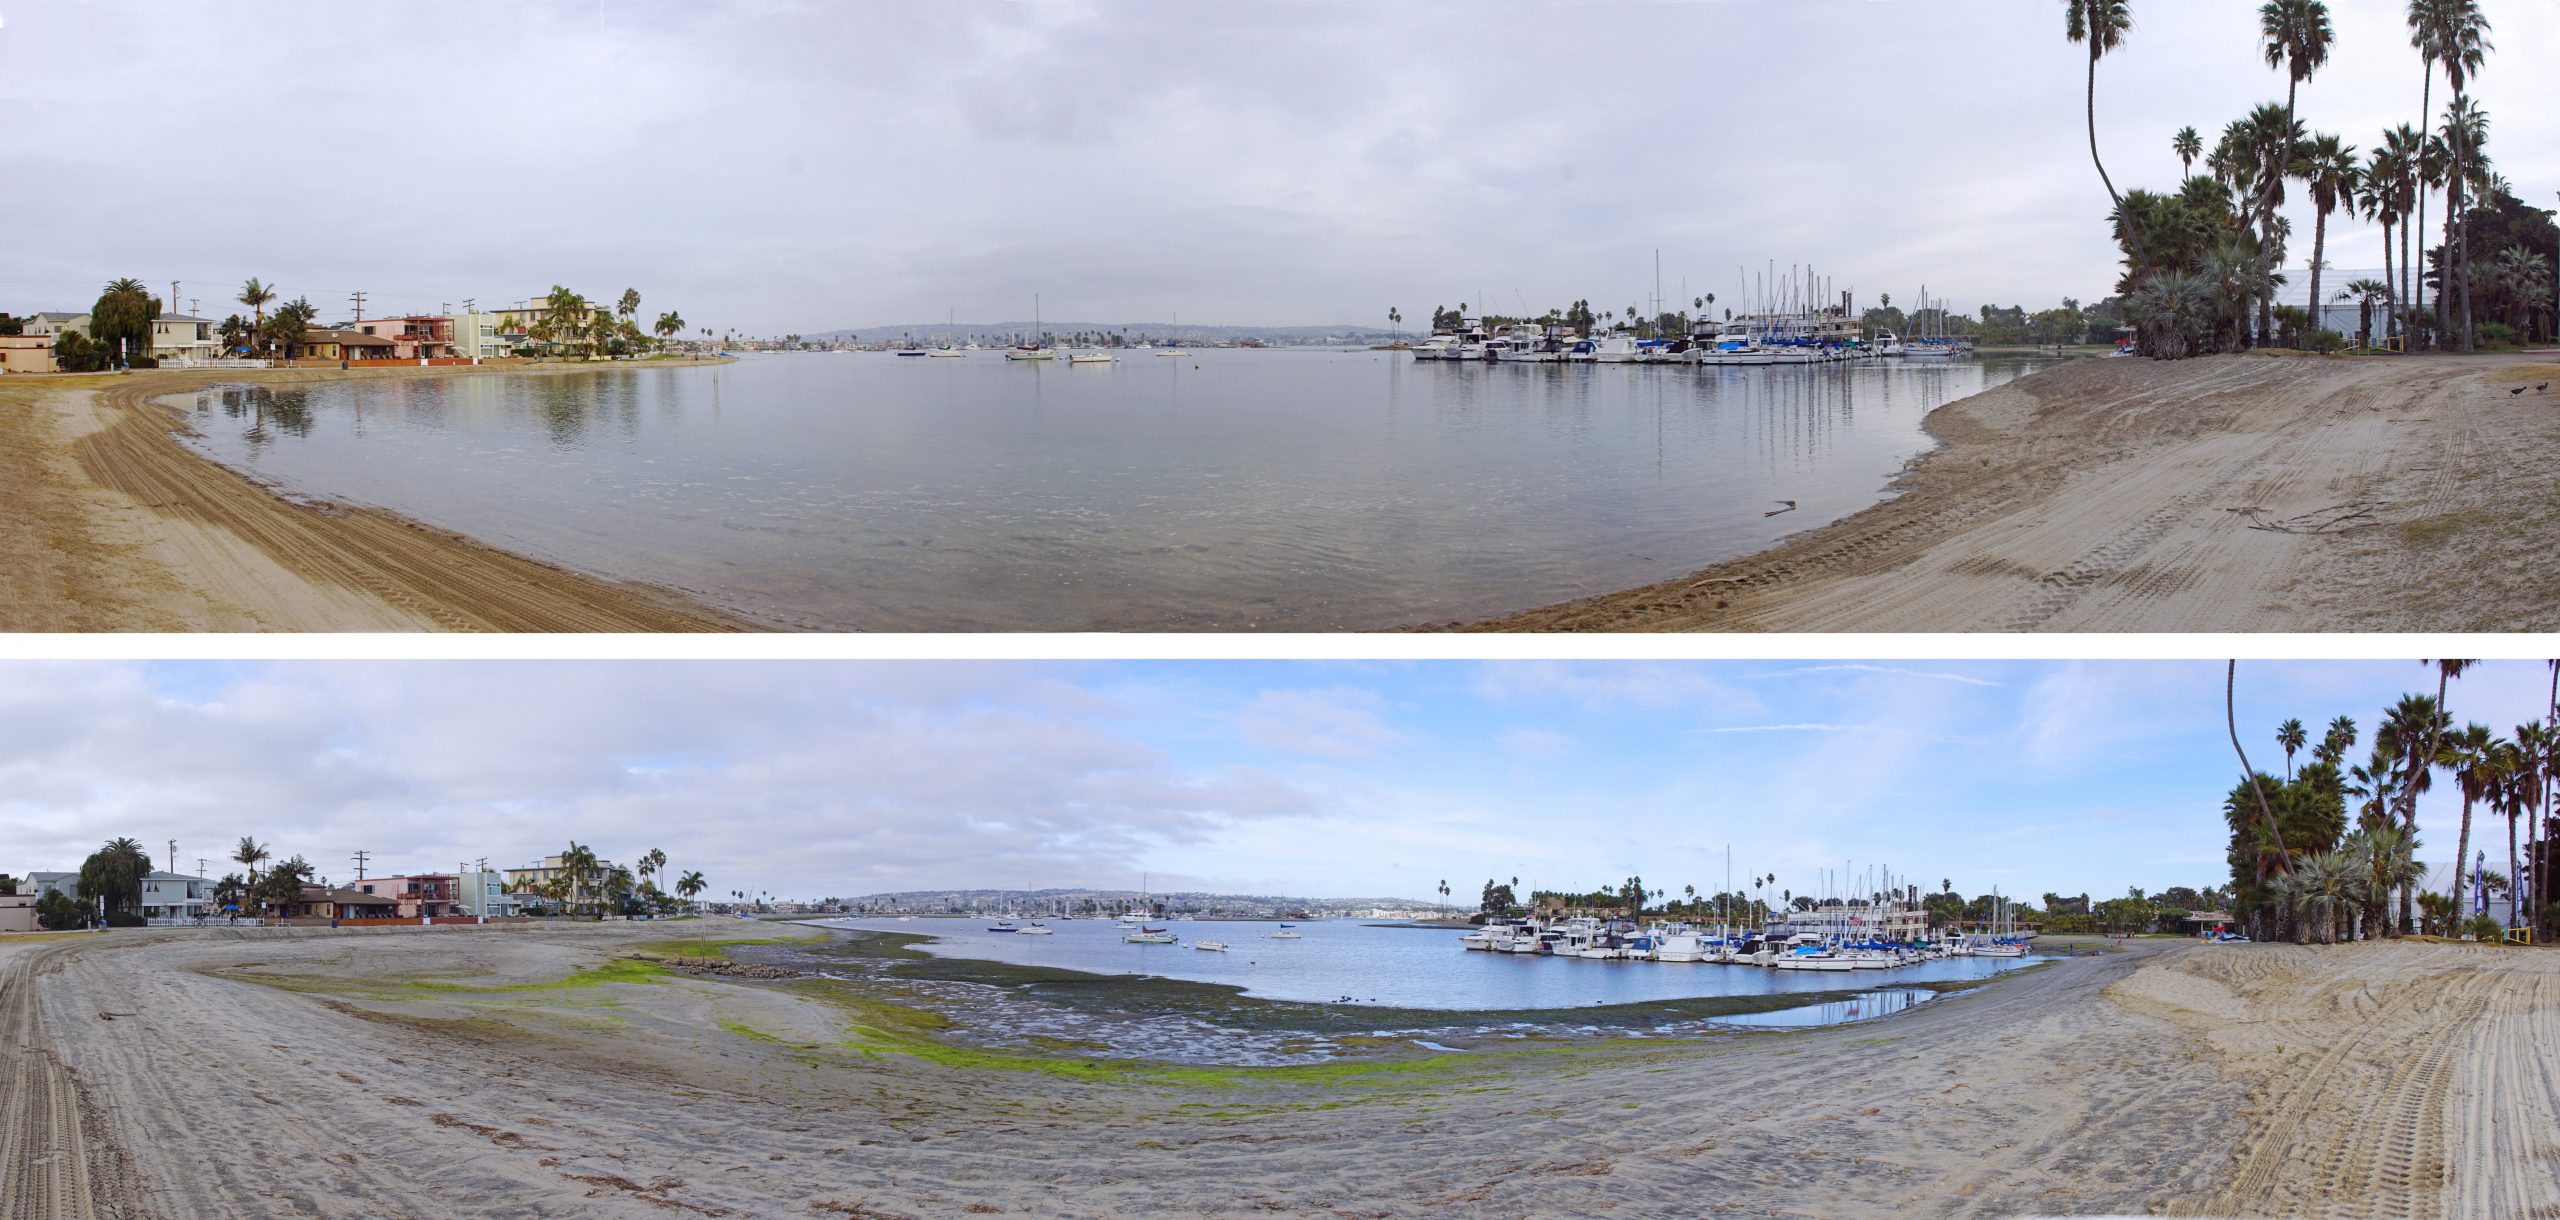 Mission Bay has its highs and lows.